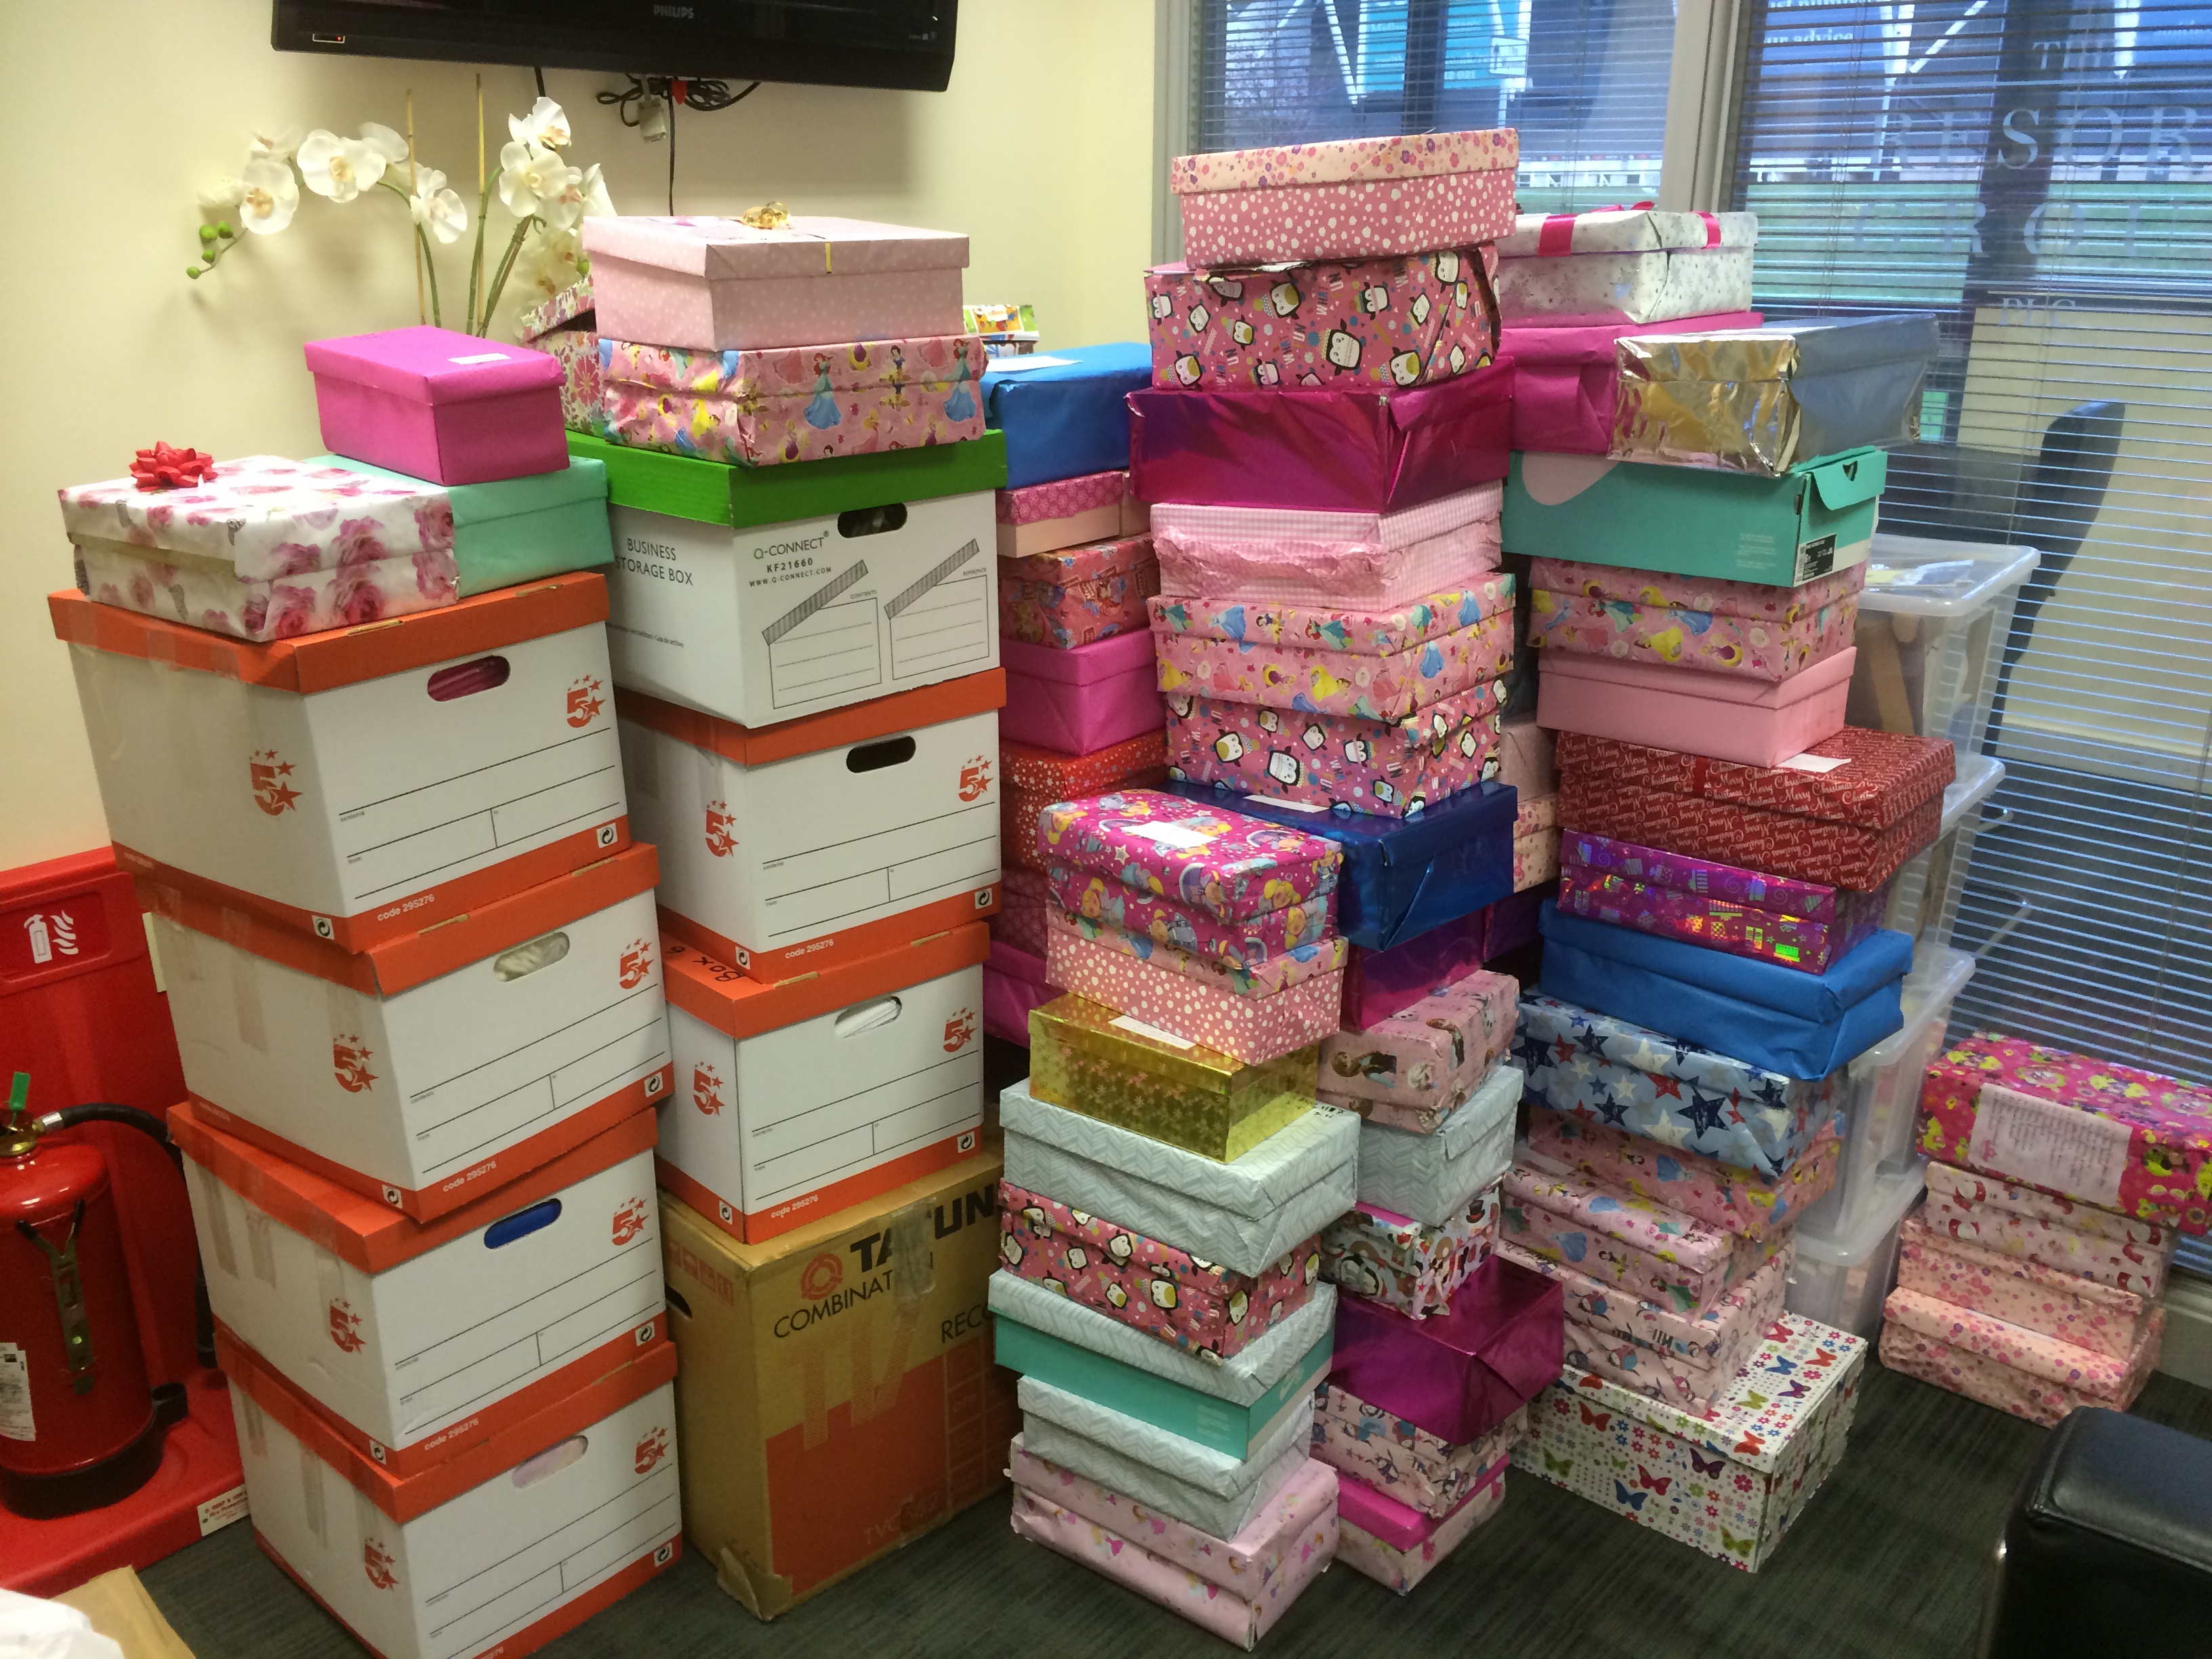 Charity Christmas shoeboxes ready to send to Cape Verde - Cape Verde Foundation